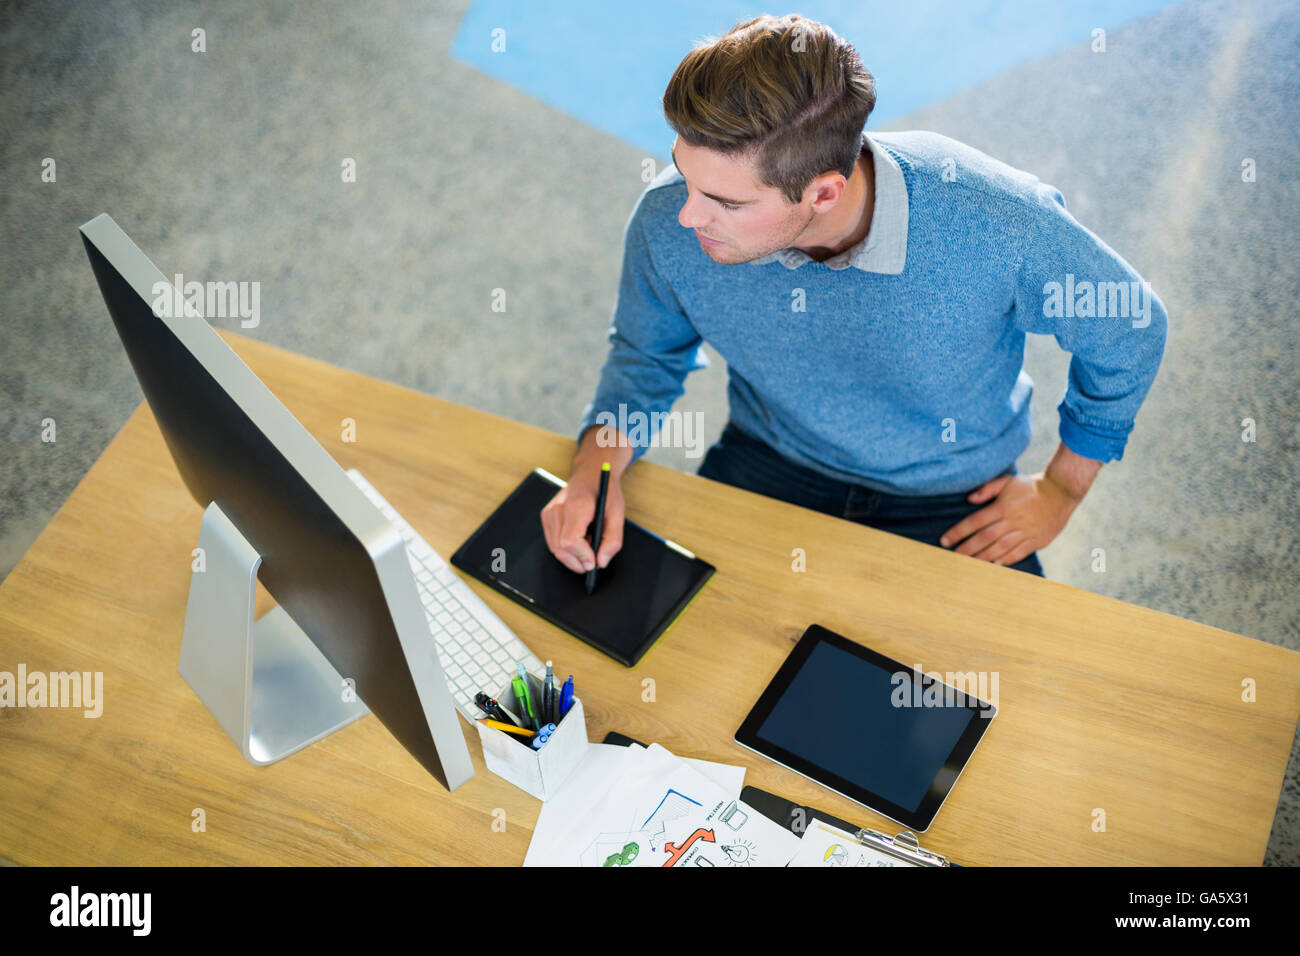 Businessman working on graphics tablet in office Banque D'Images